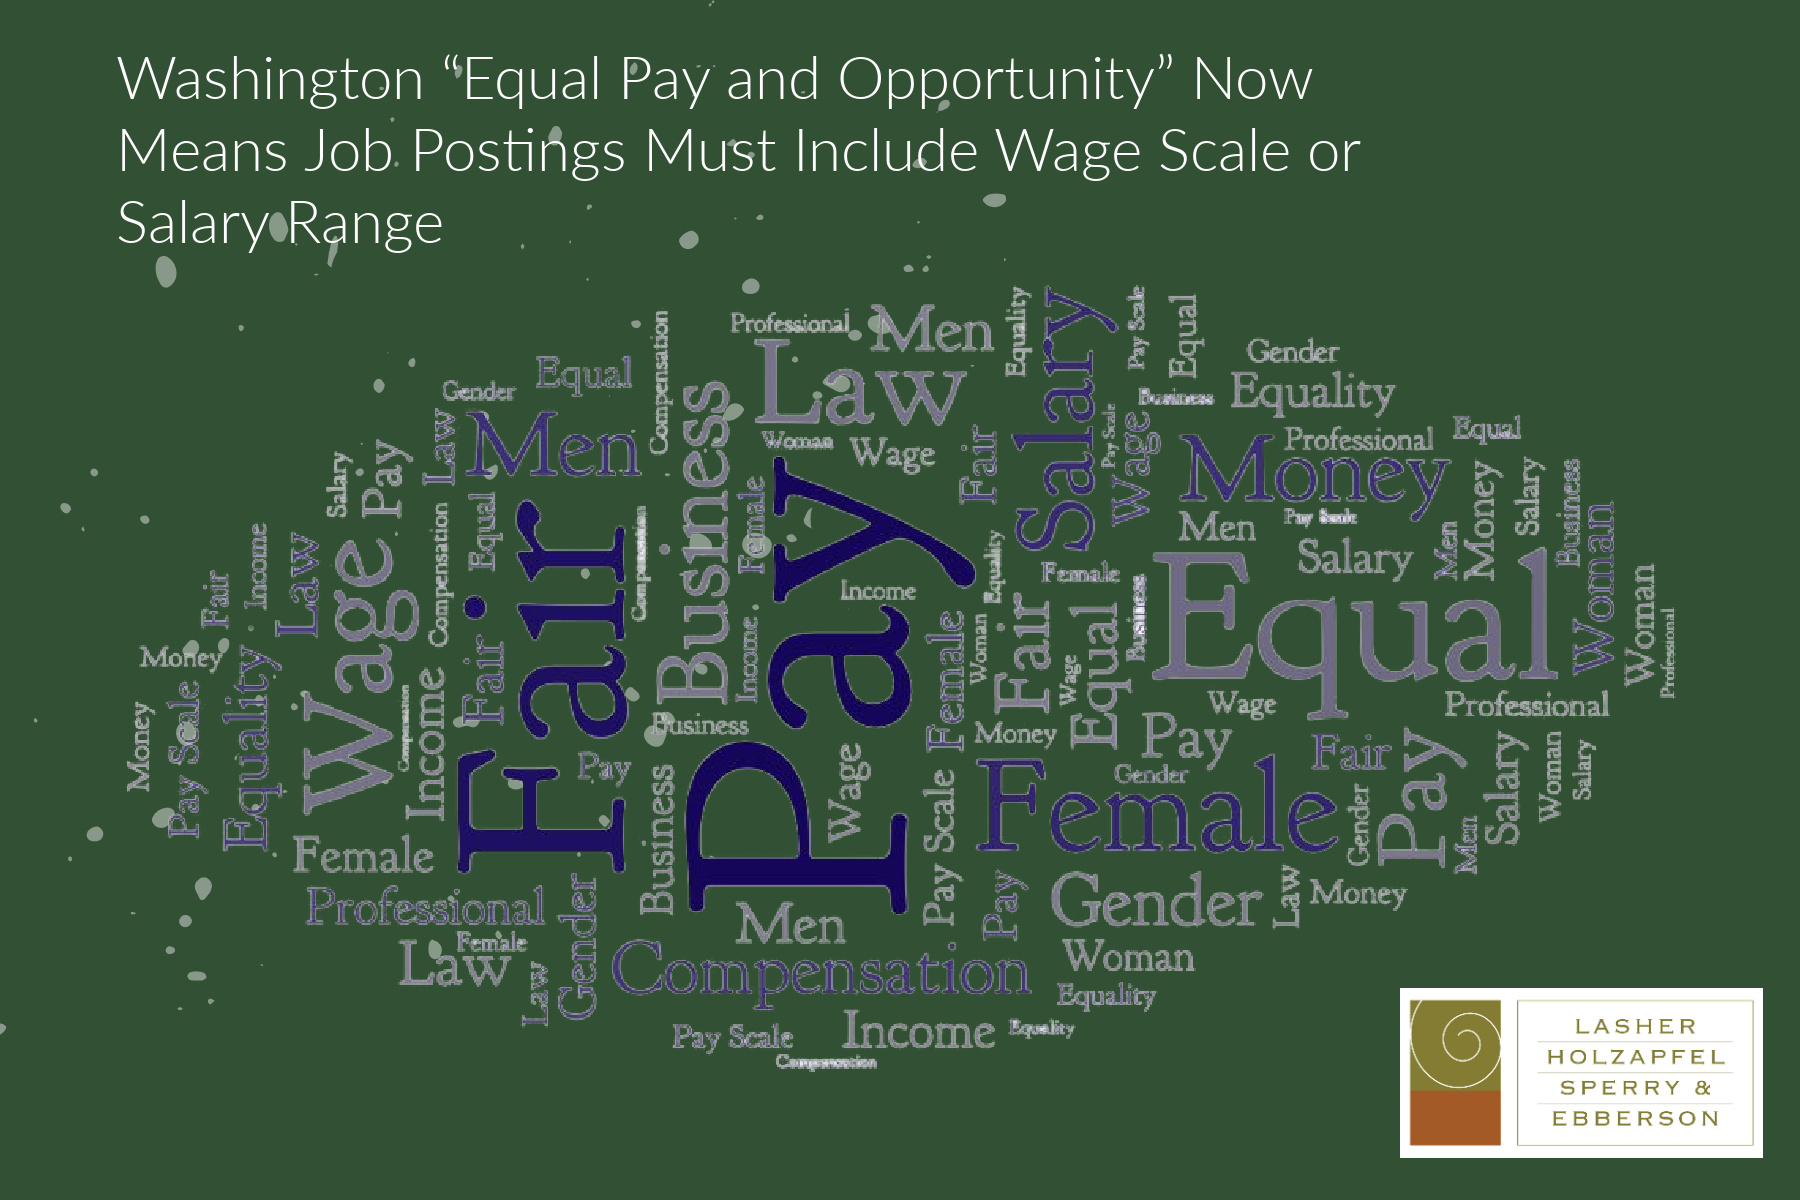 Washington “Equal Pay and Opportunity” Now Means Job Postings Must Include Wage Scale or Salary Range